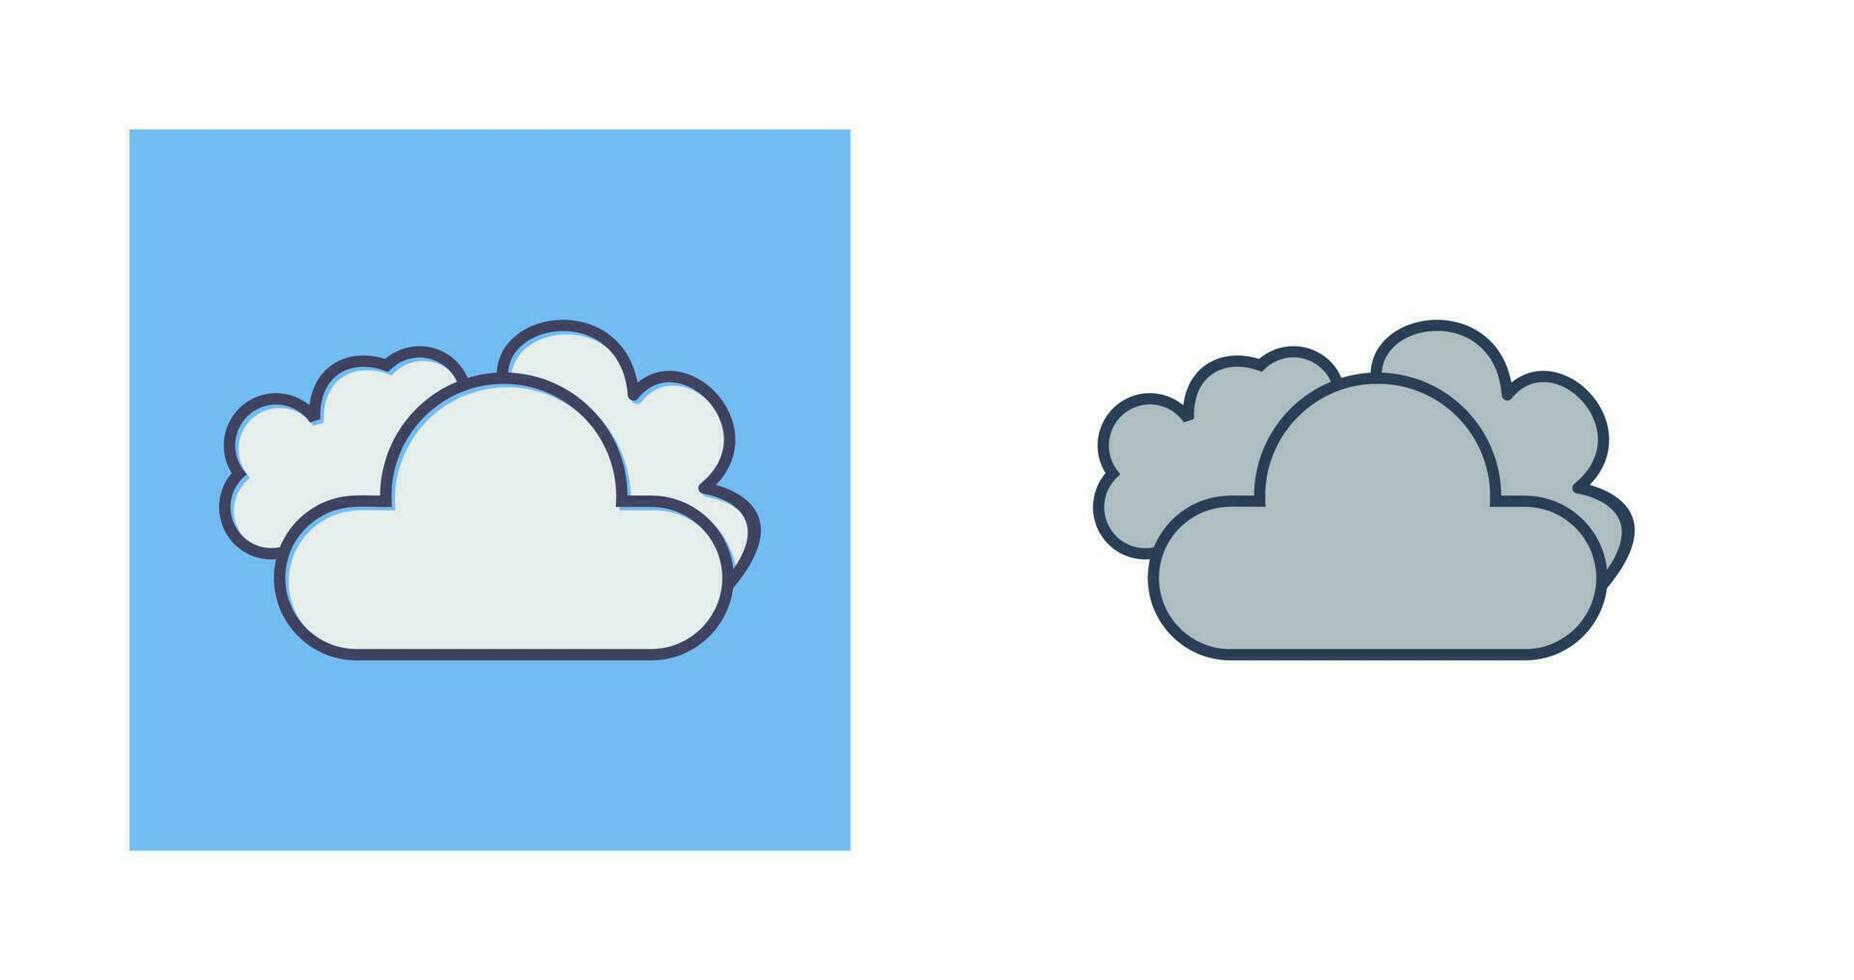 Cloudy Weather Vector Icon